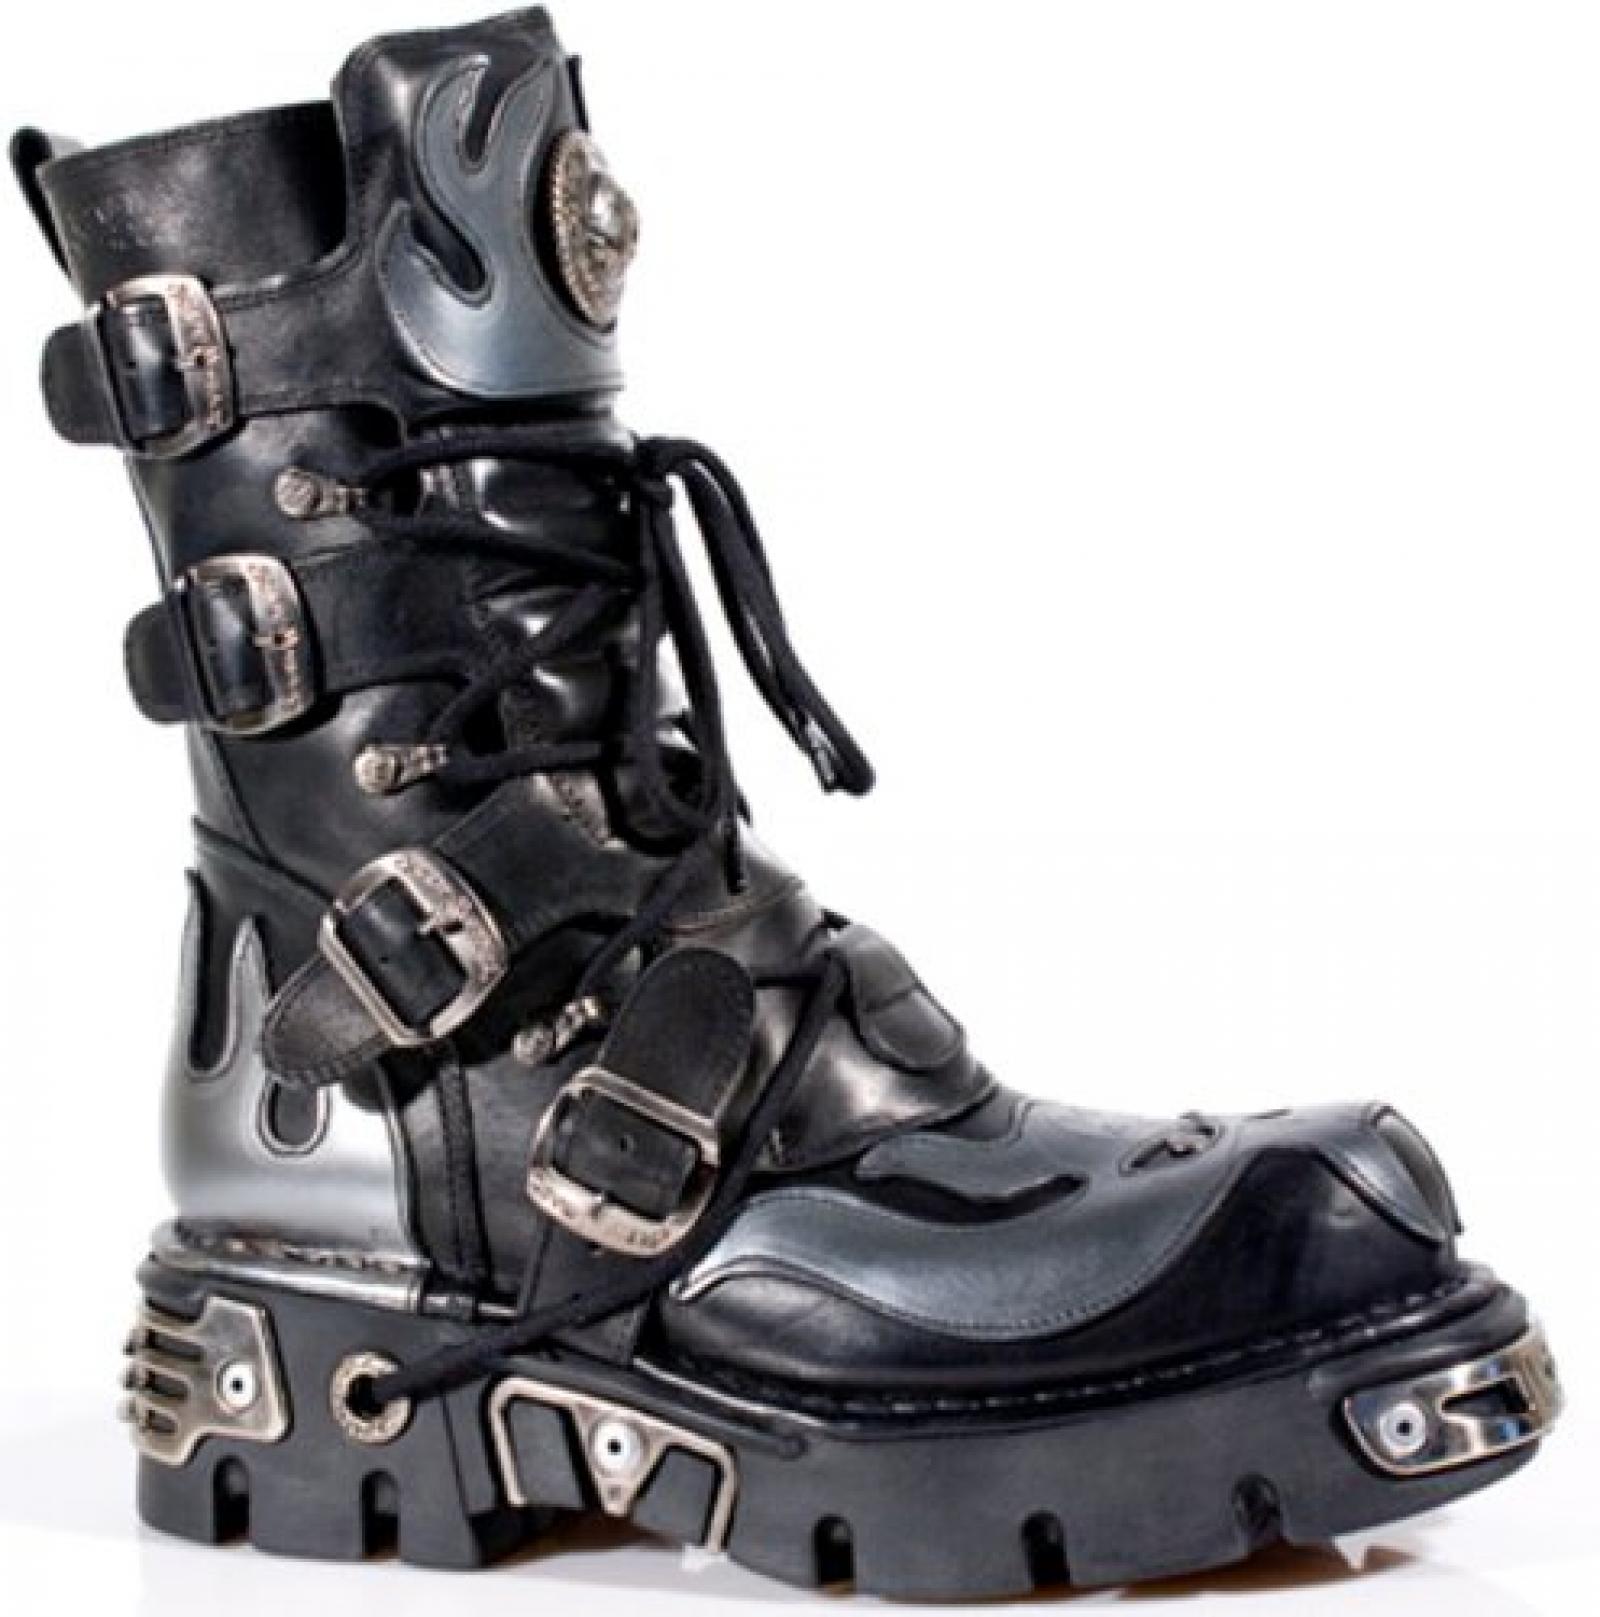 New Rock Boots Unisex Stiefel - Style 107 S2 silber 